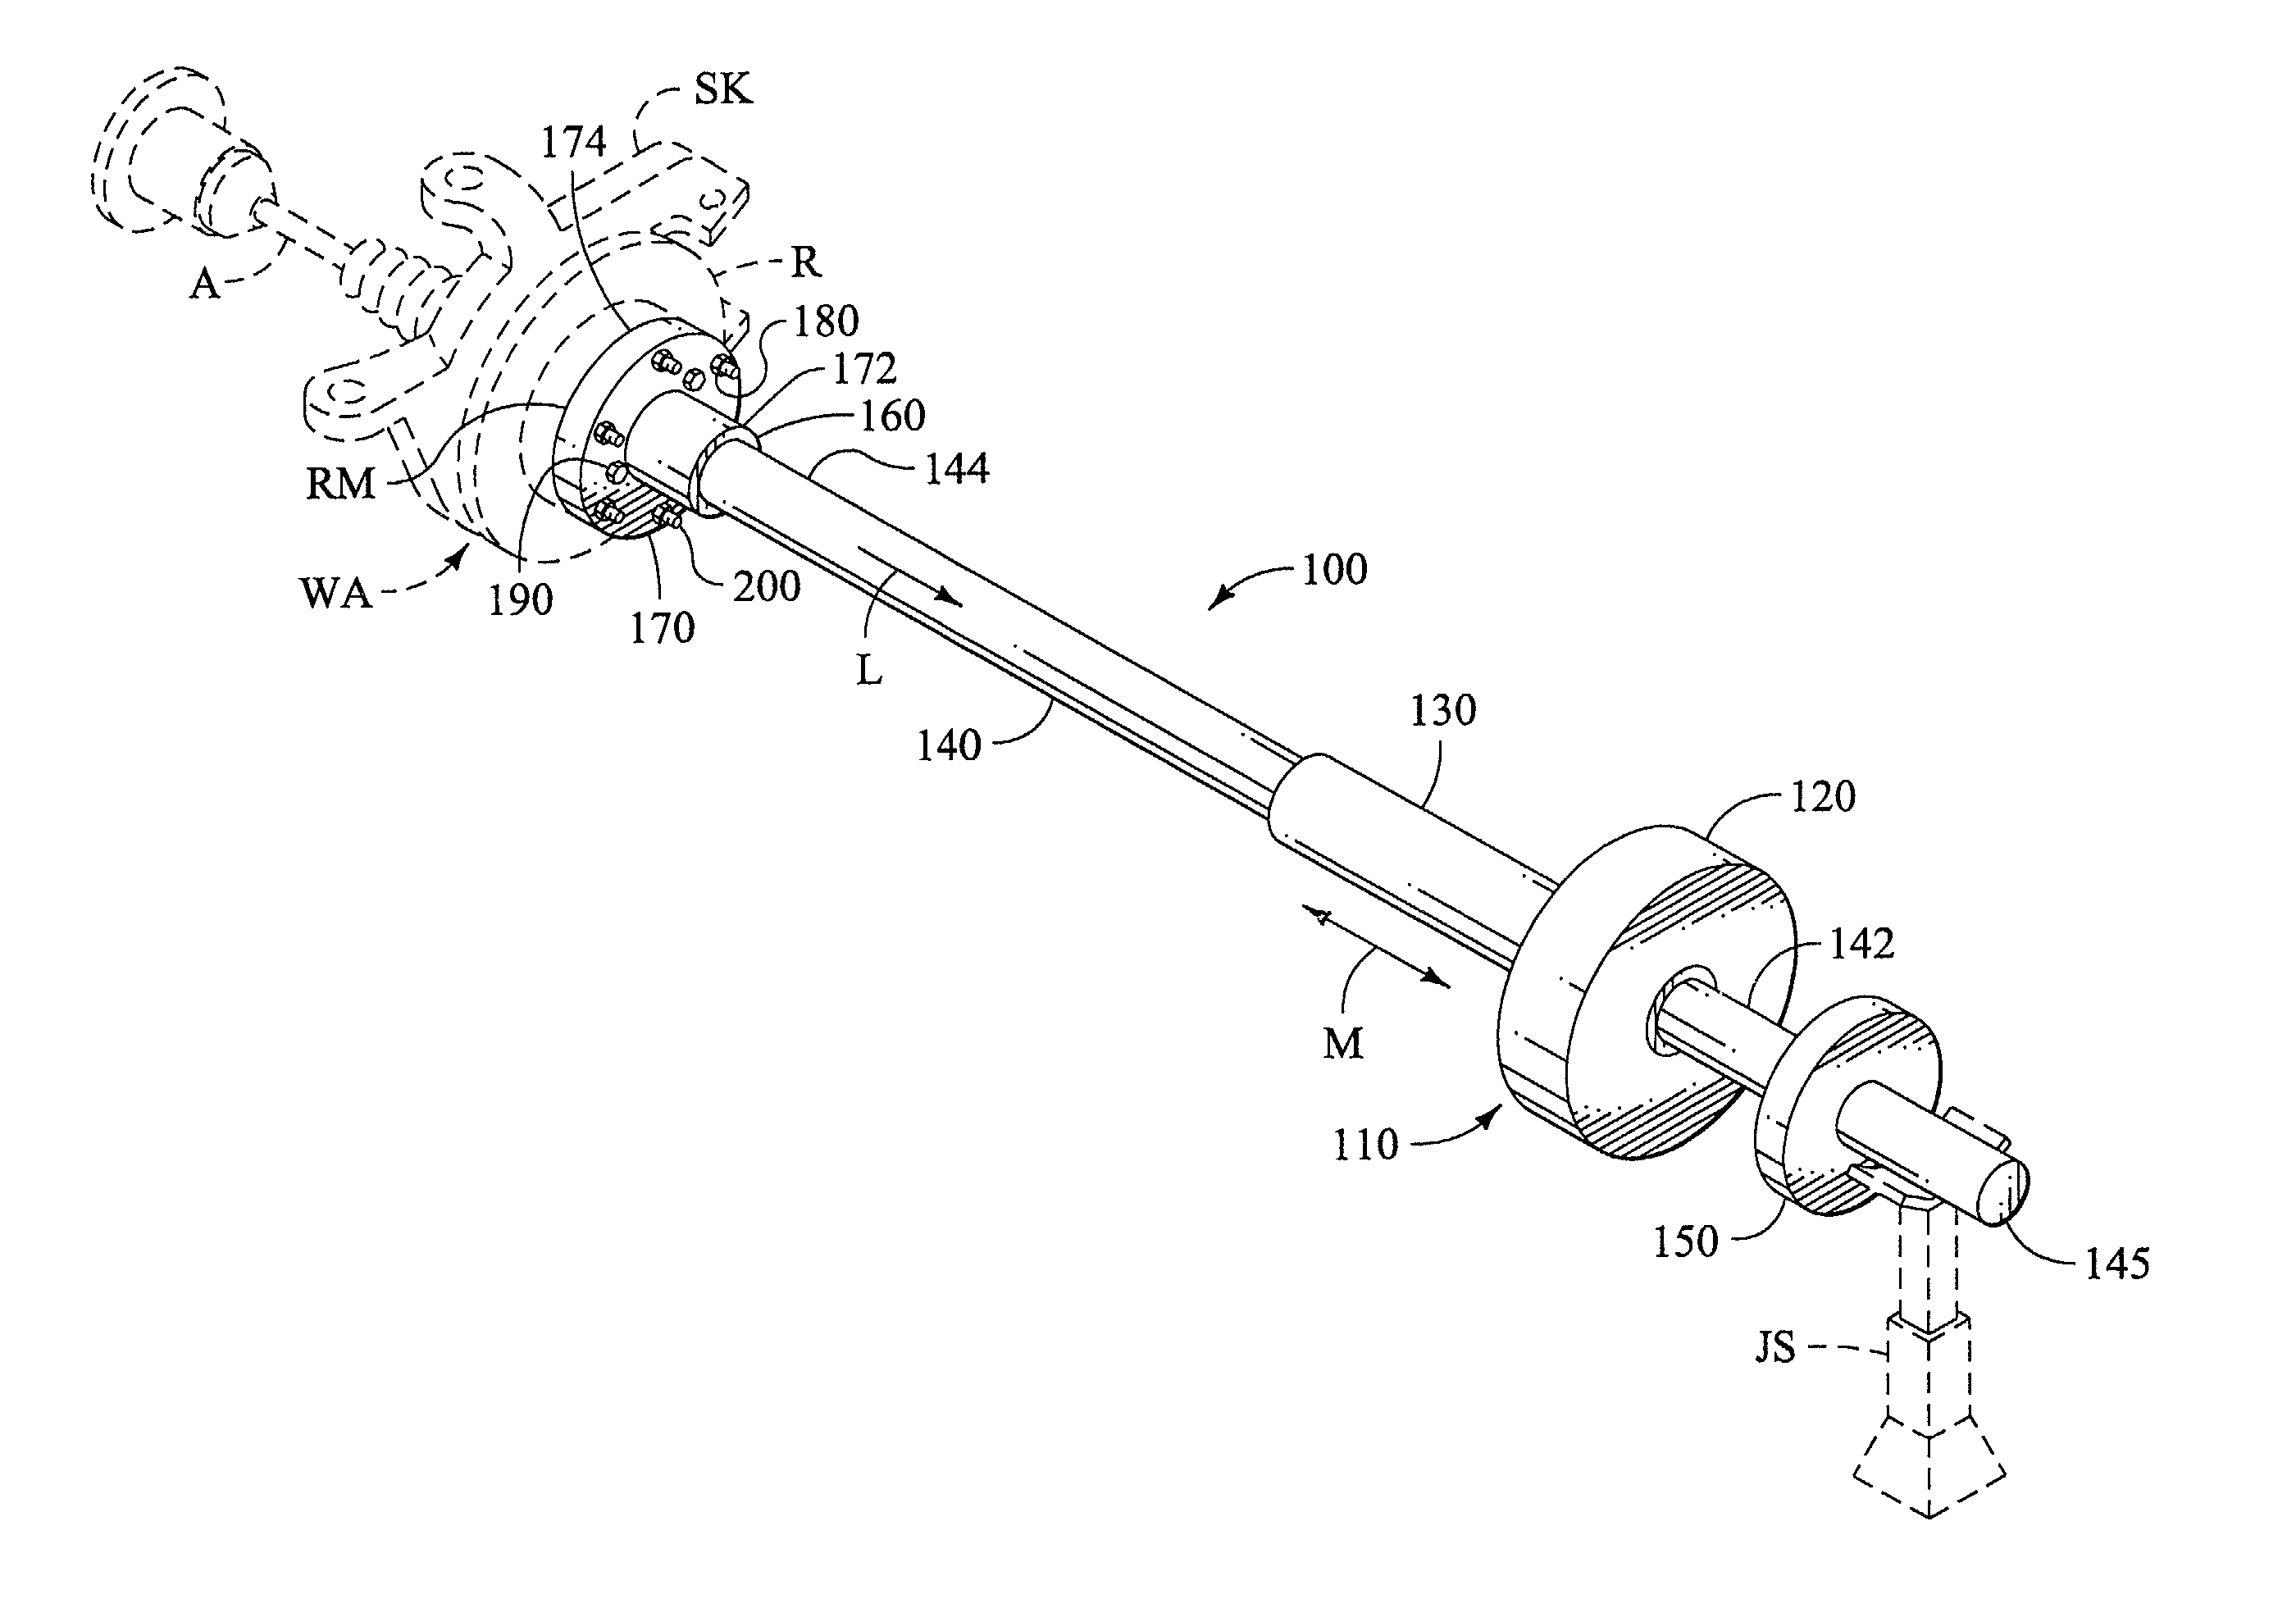 Automotive wheel assembly removal apparatus